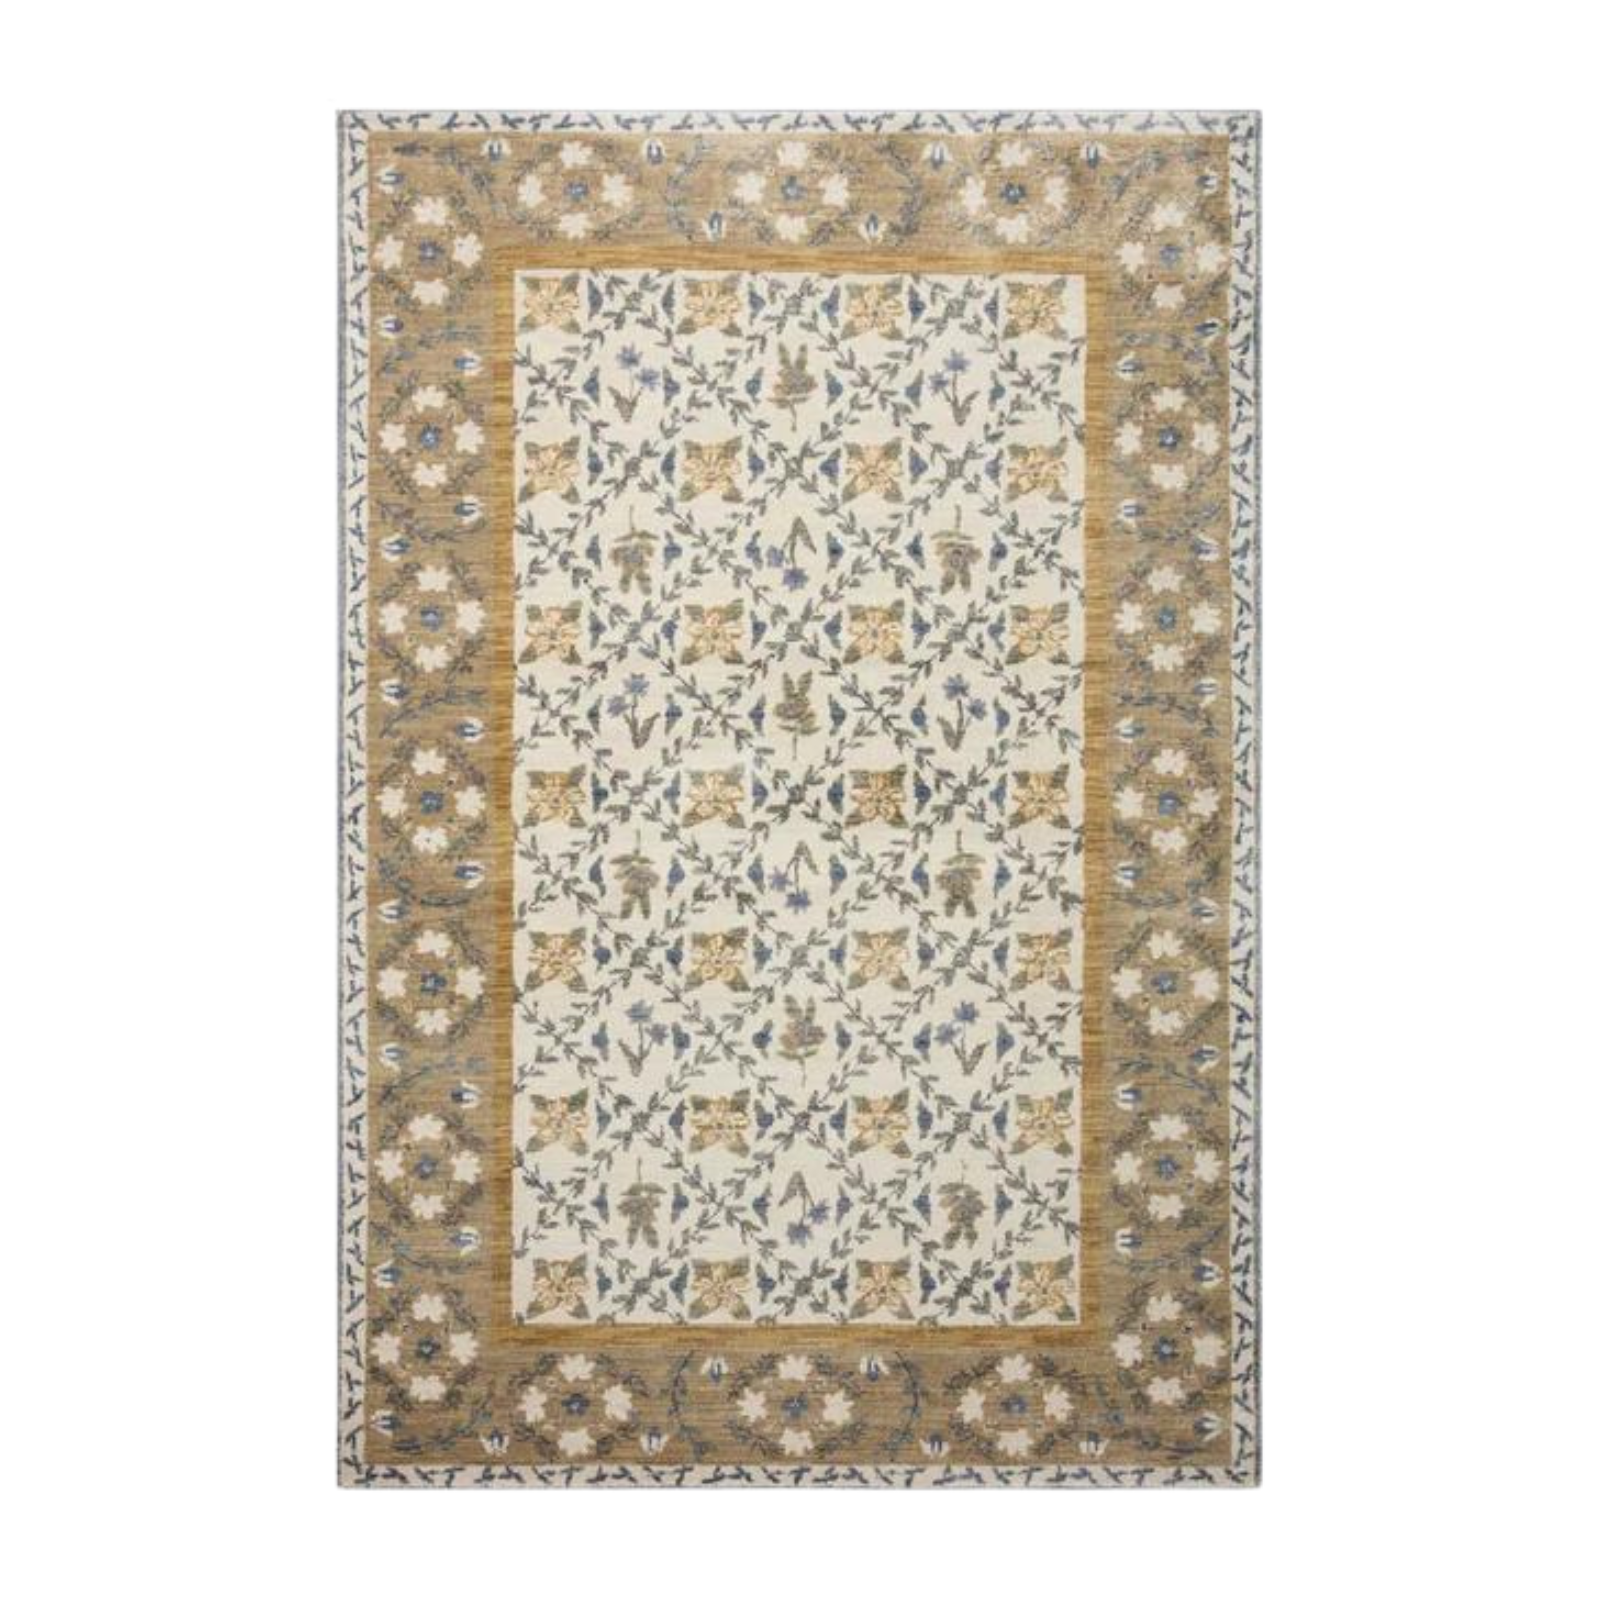 Rifle Paper Co. X Loloi/ Fiore Belvedere Gold Rug - Rug & Weave